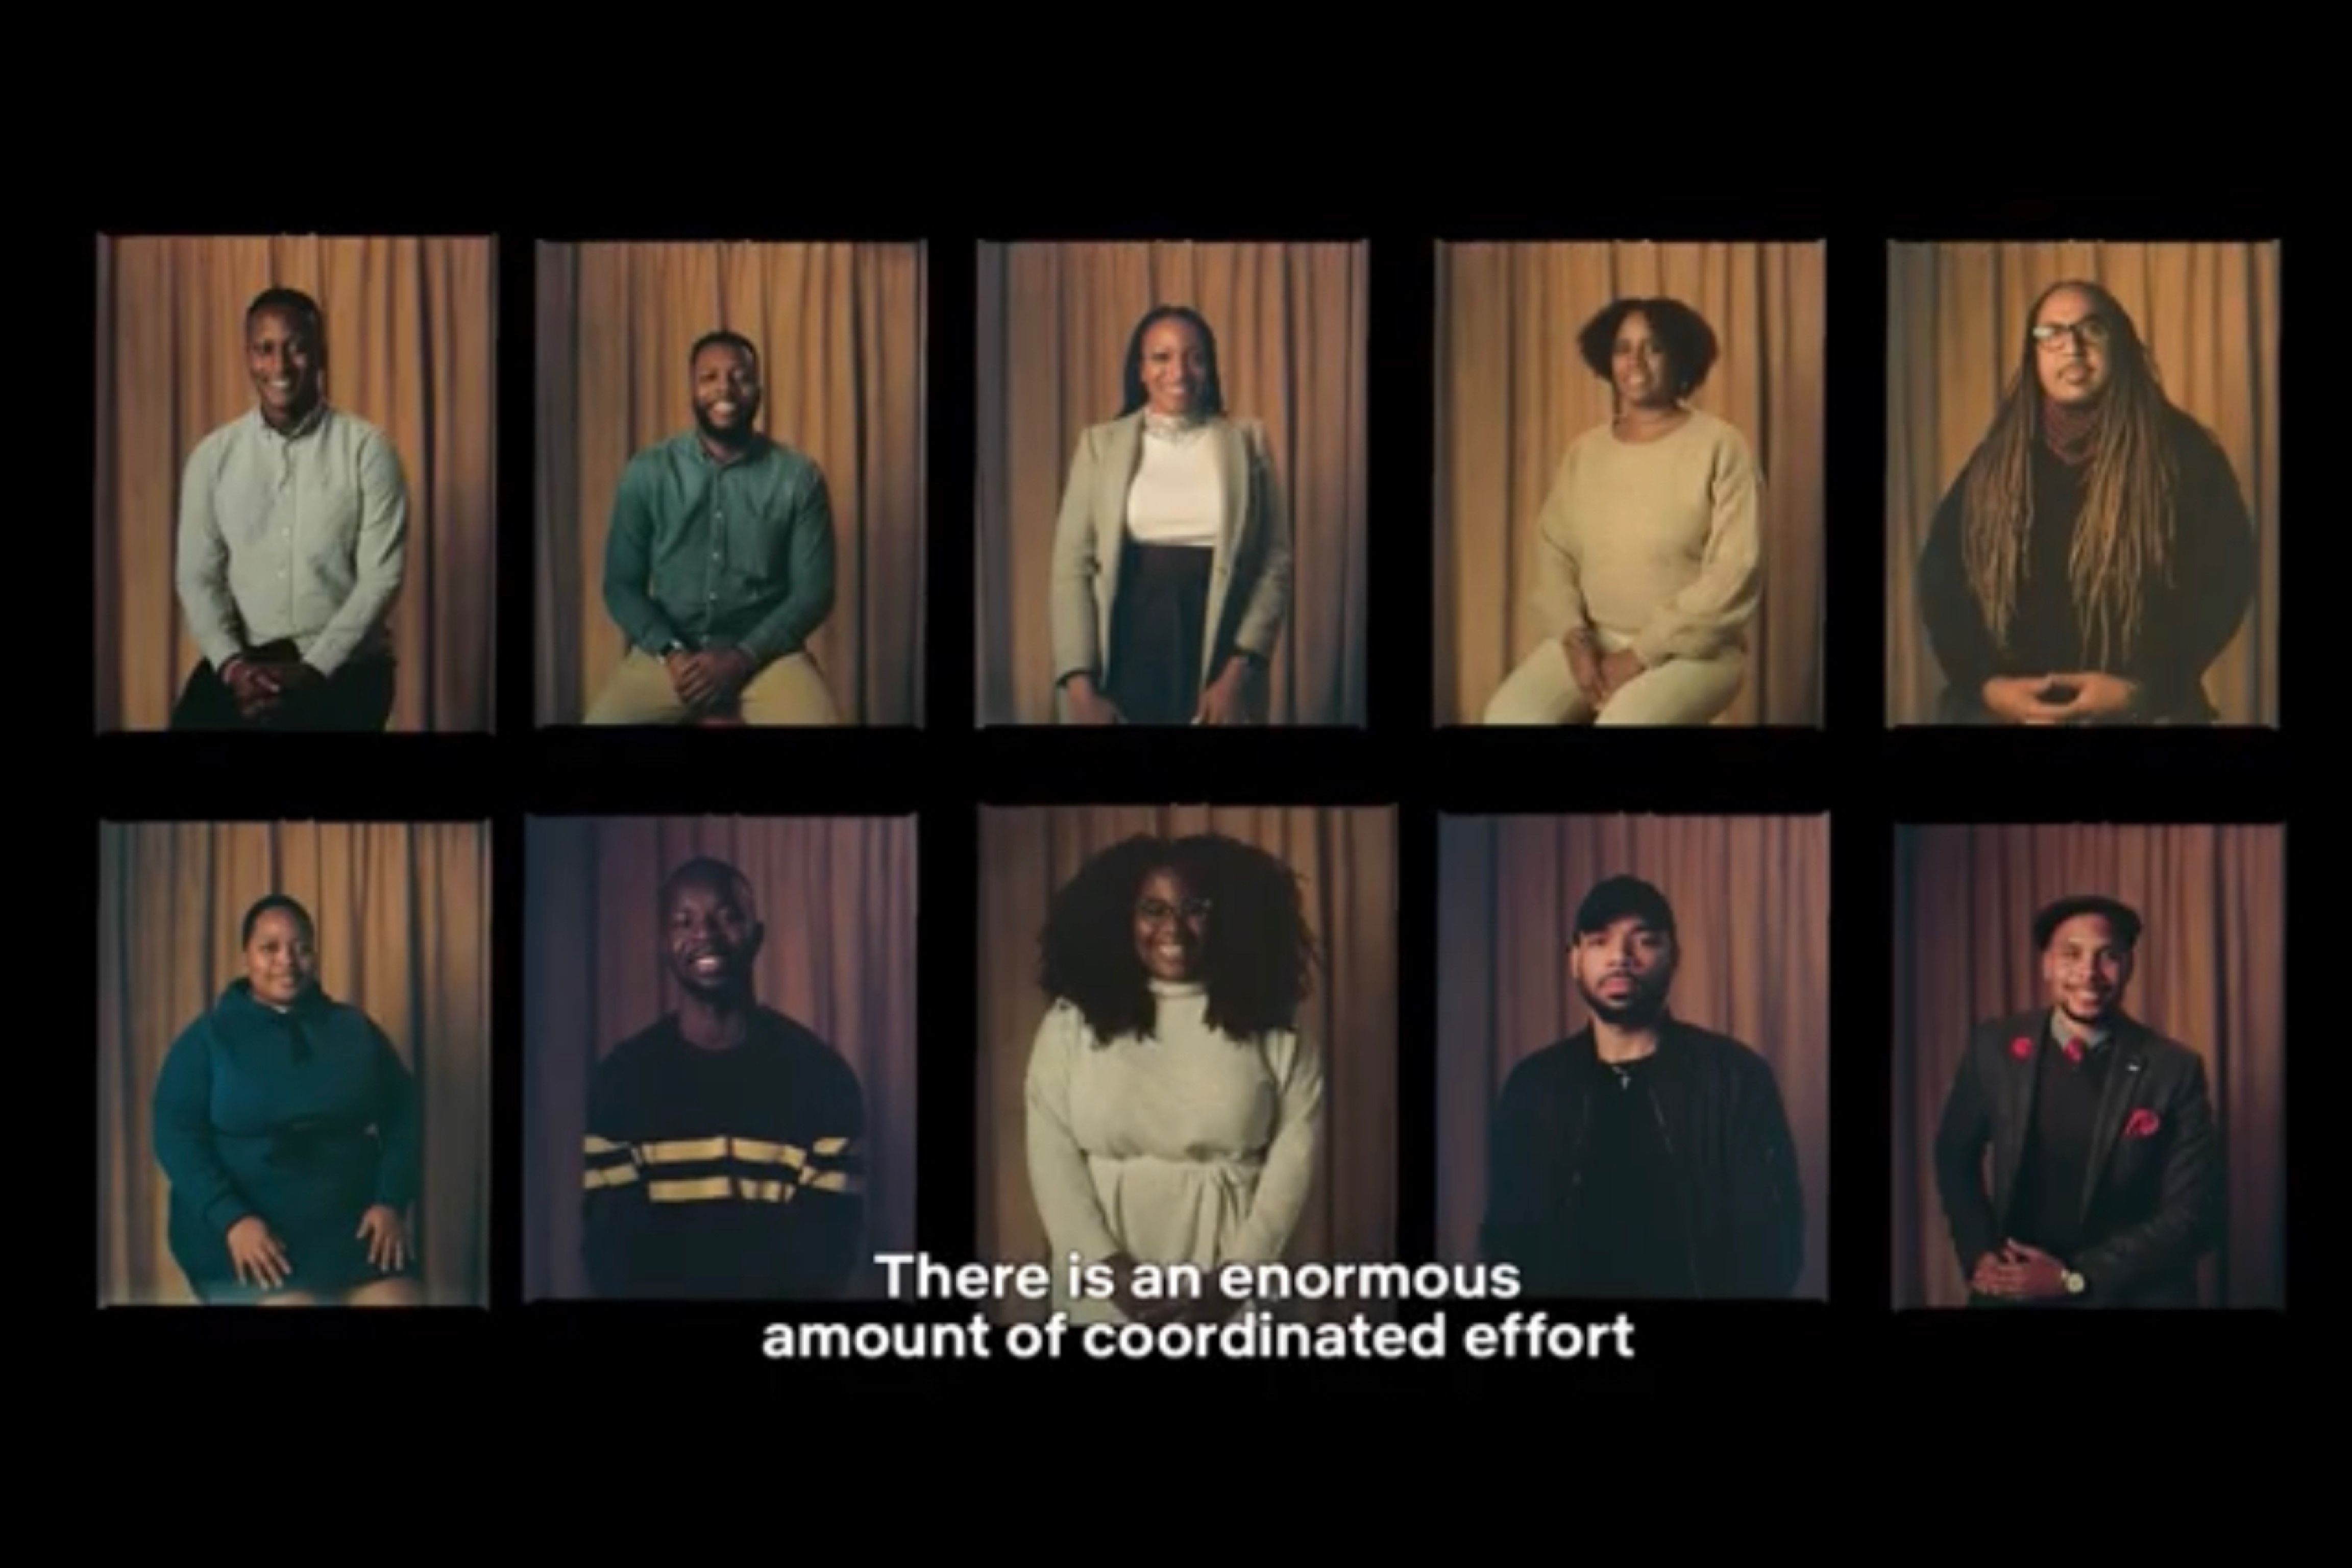 [WATCH] Netflix Shares Its First-Ever Inclusion Report in New Short Film